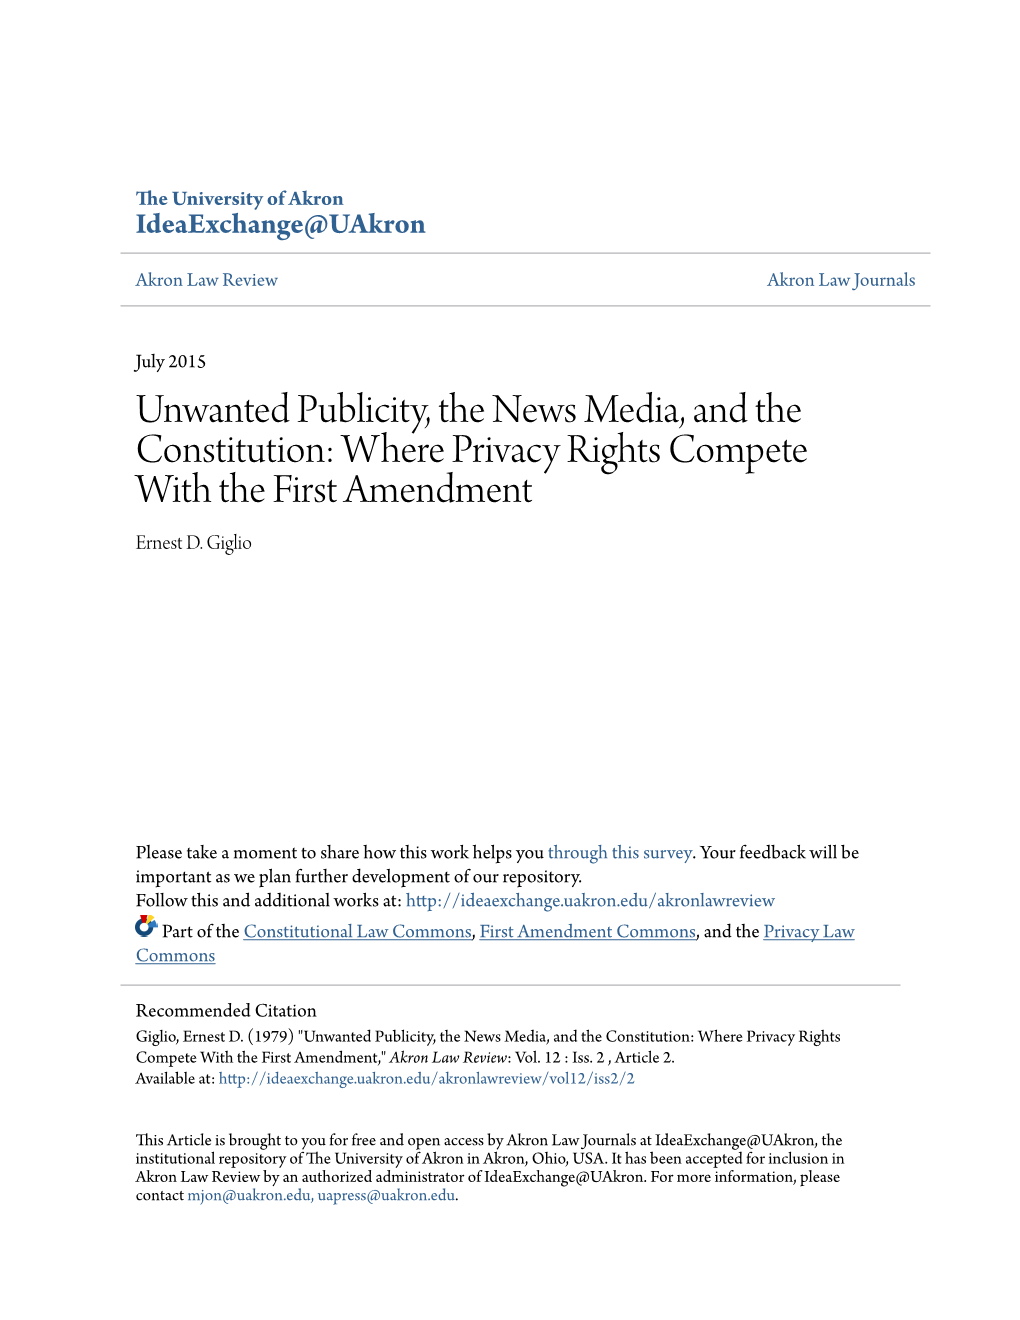 Unwanted Publicity, the News Media, and the Constitution: Where Privacy Rights Compete with the First Amendment Ernest D